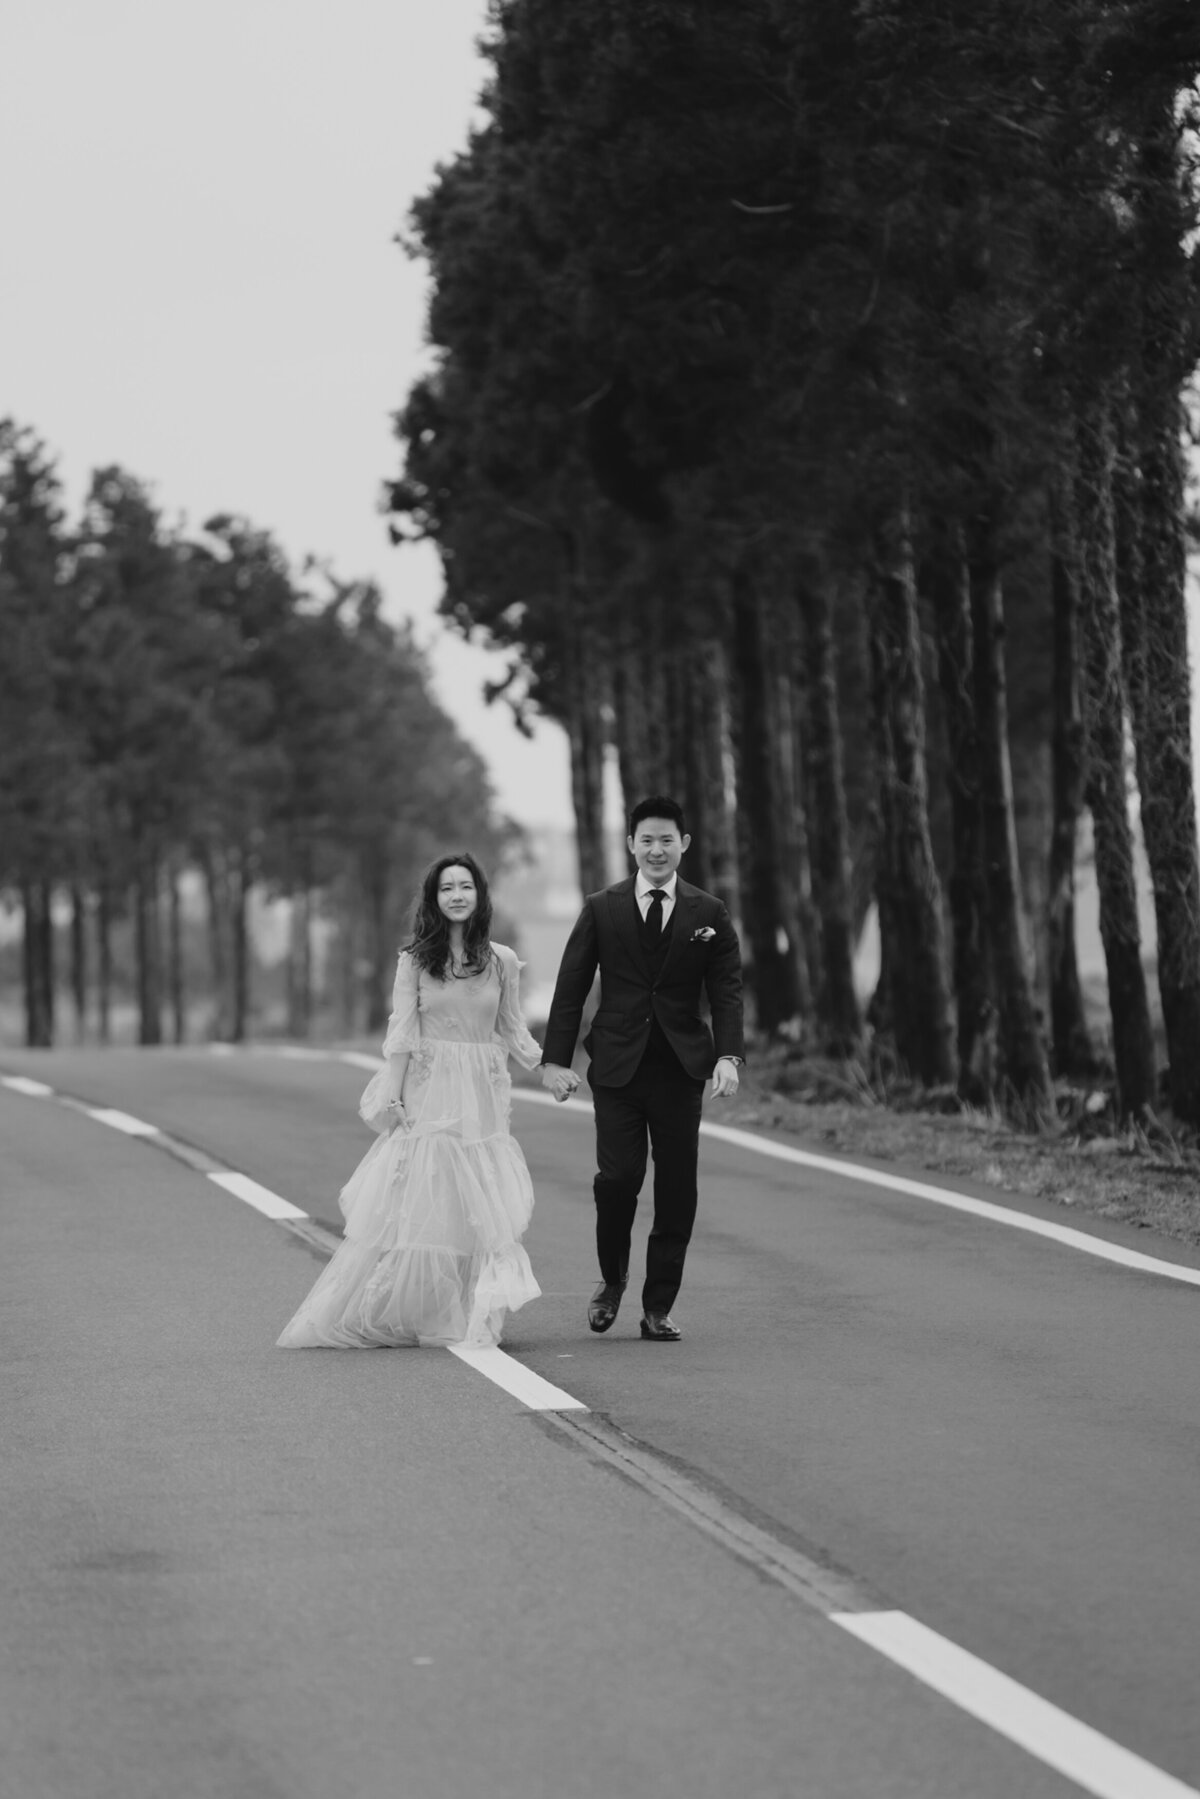 the couple holding hands while walking on one of the roads in jeju island